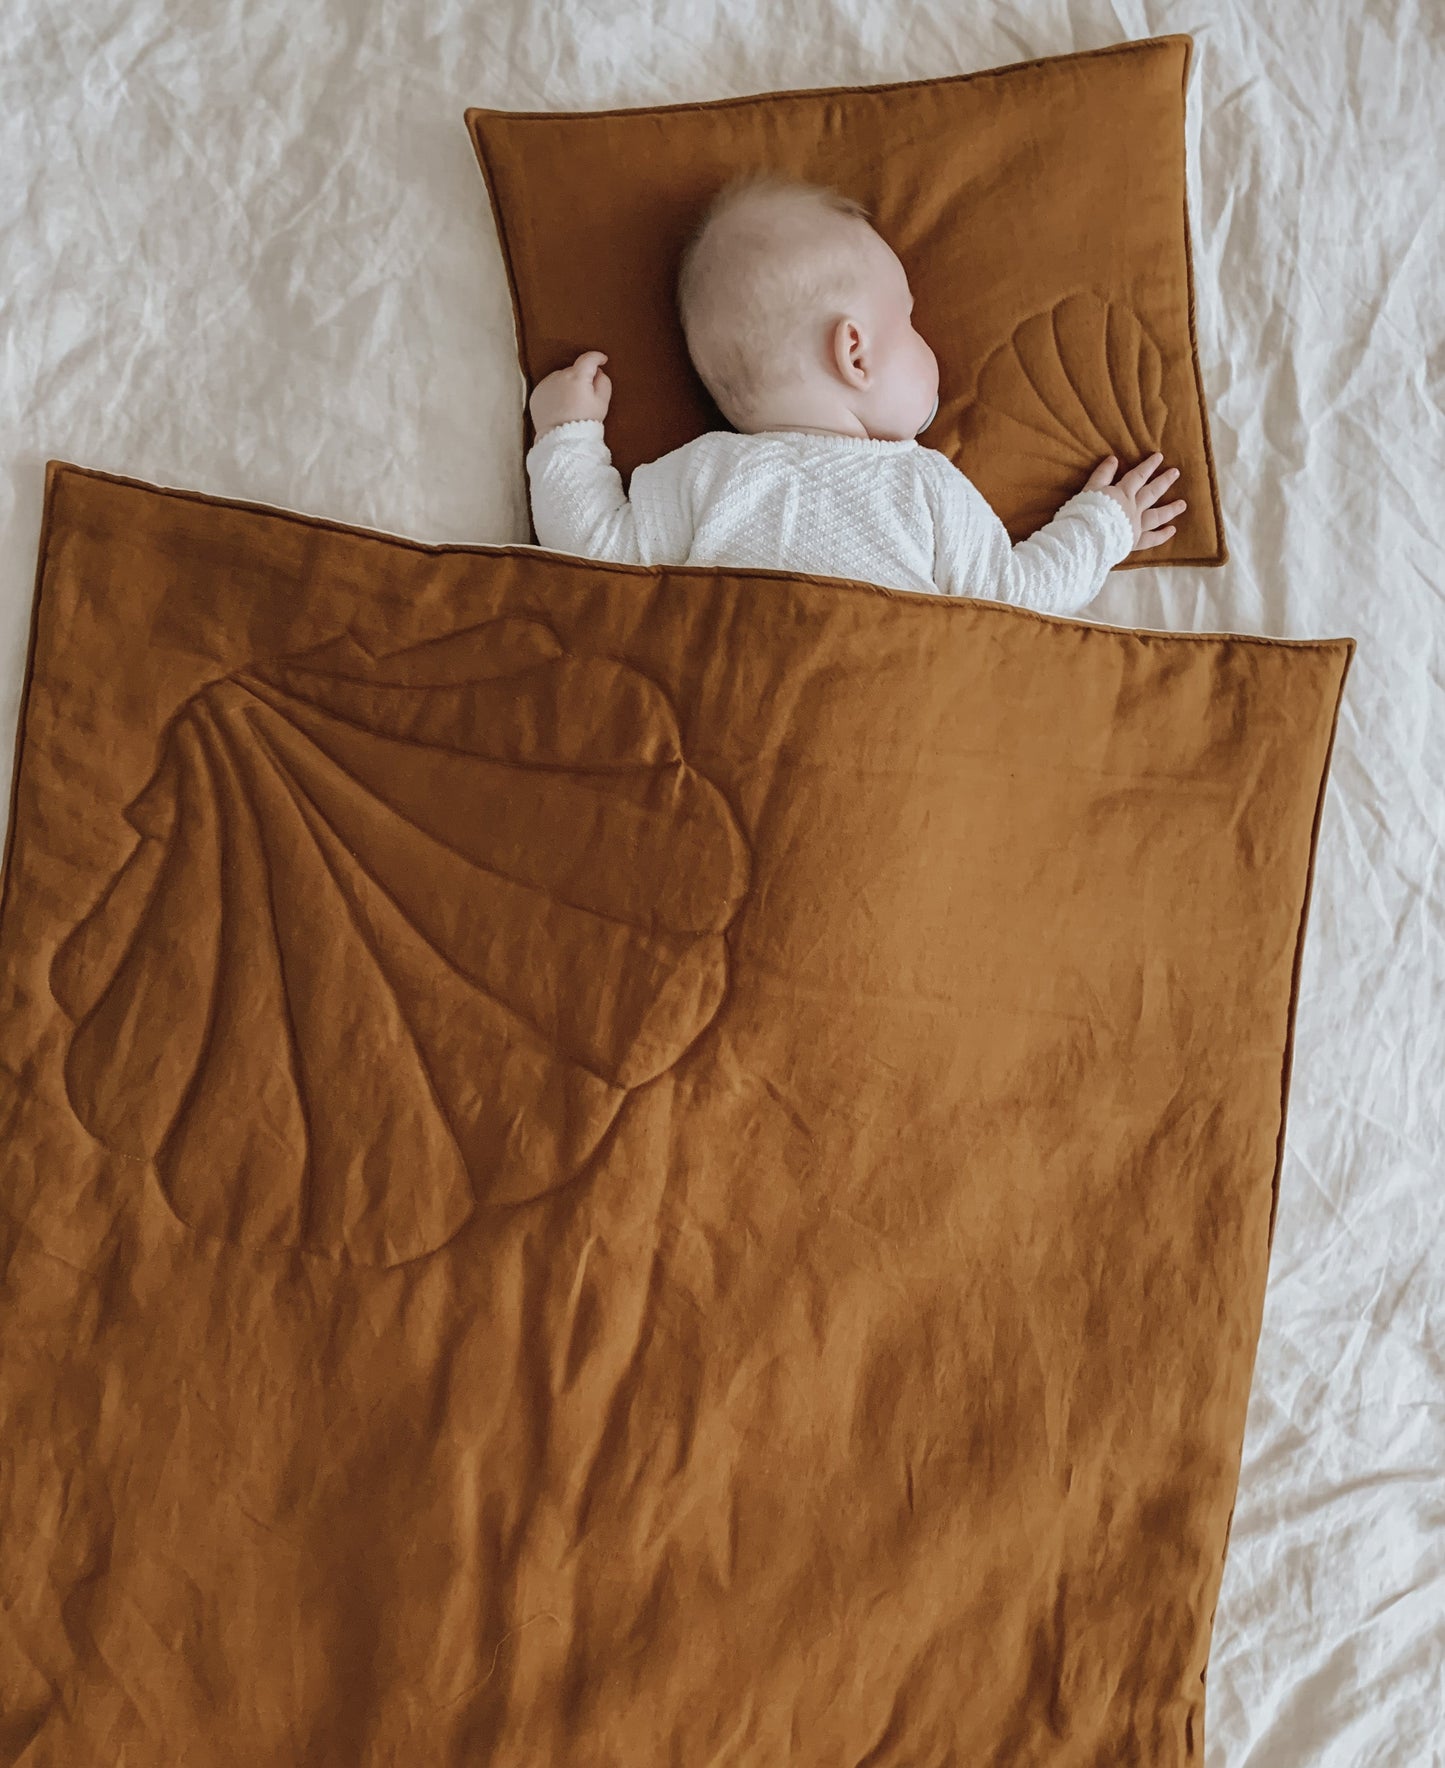 Linen "Caramel" Shell Child Cover Set (Large) by Moi Mili